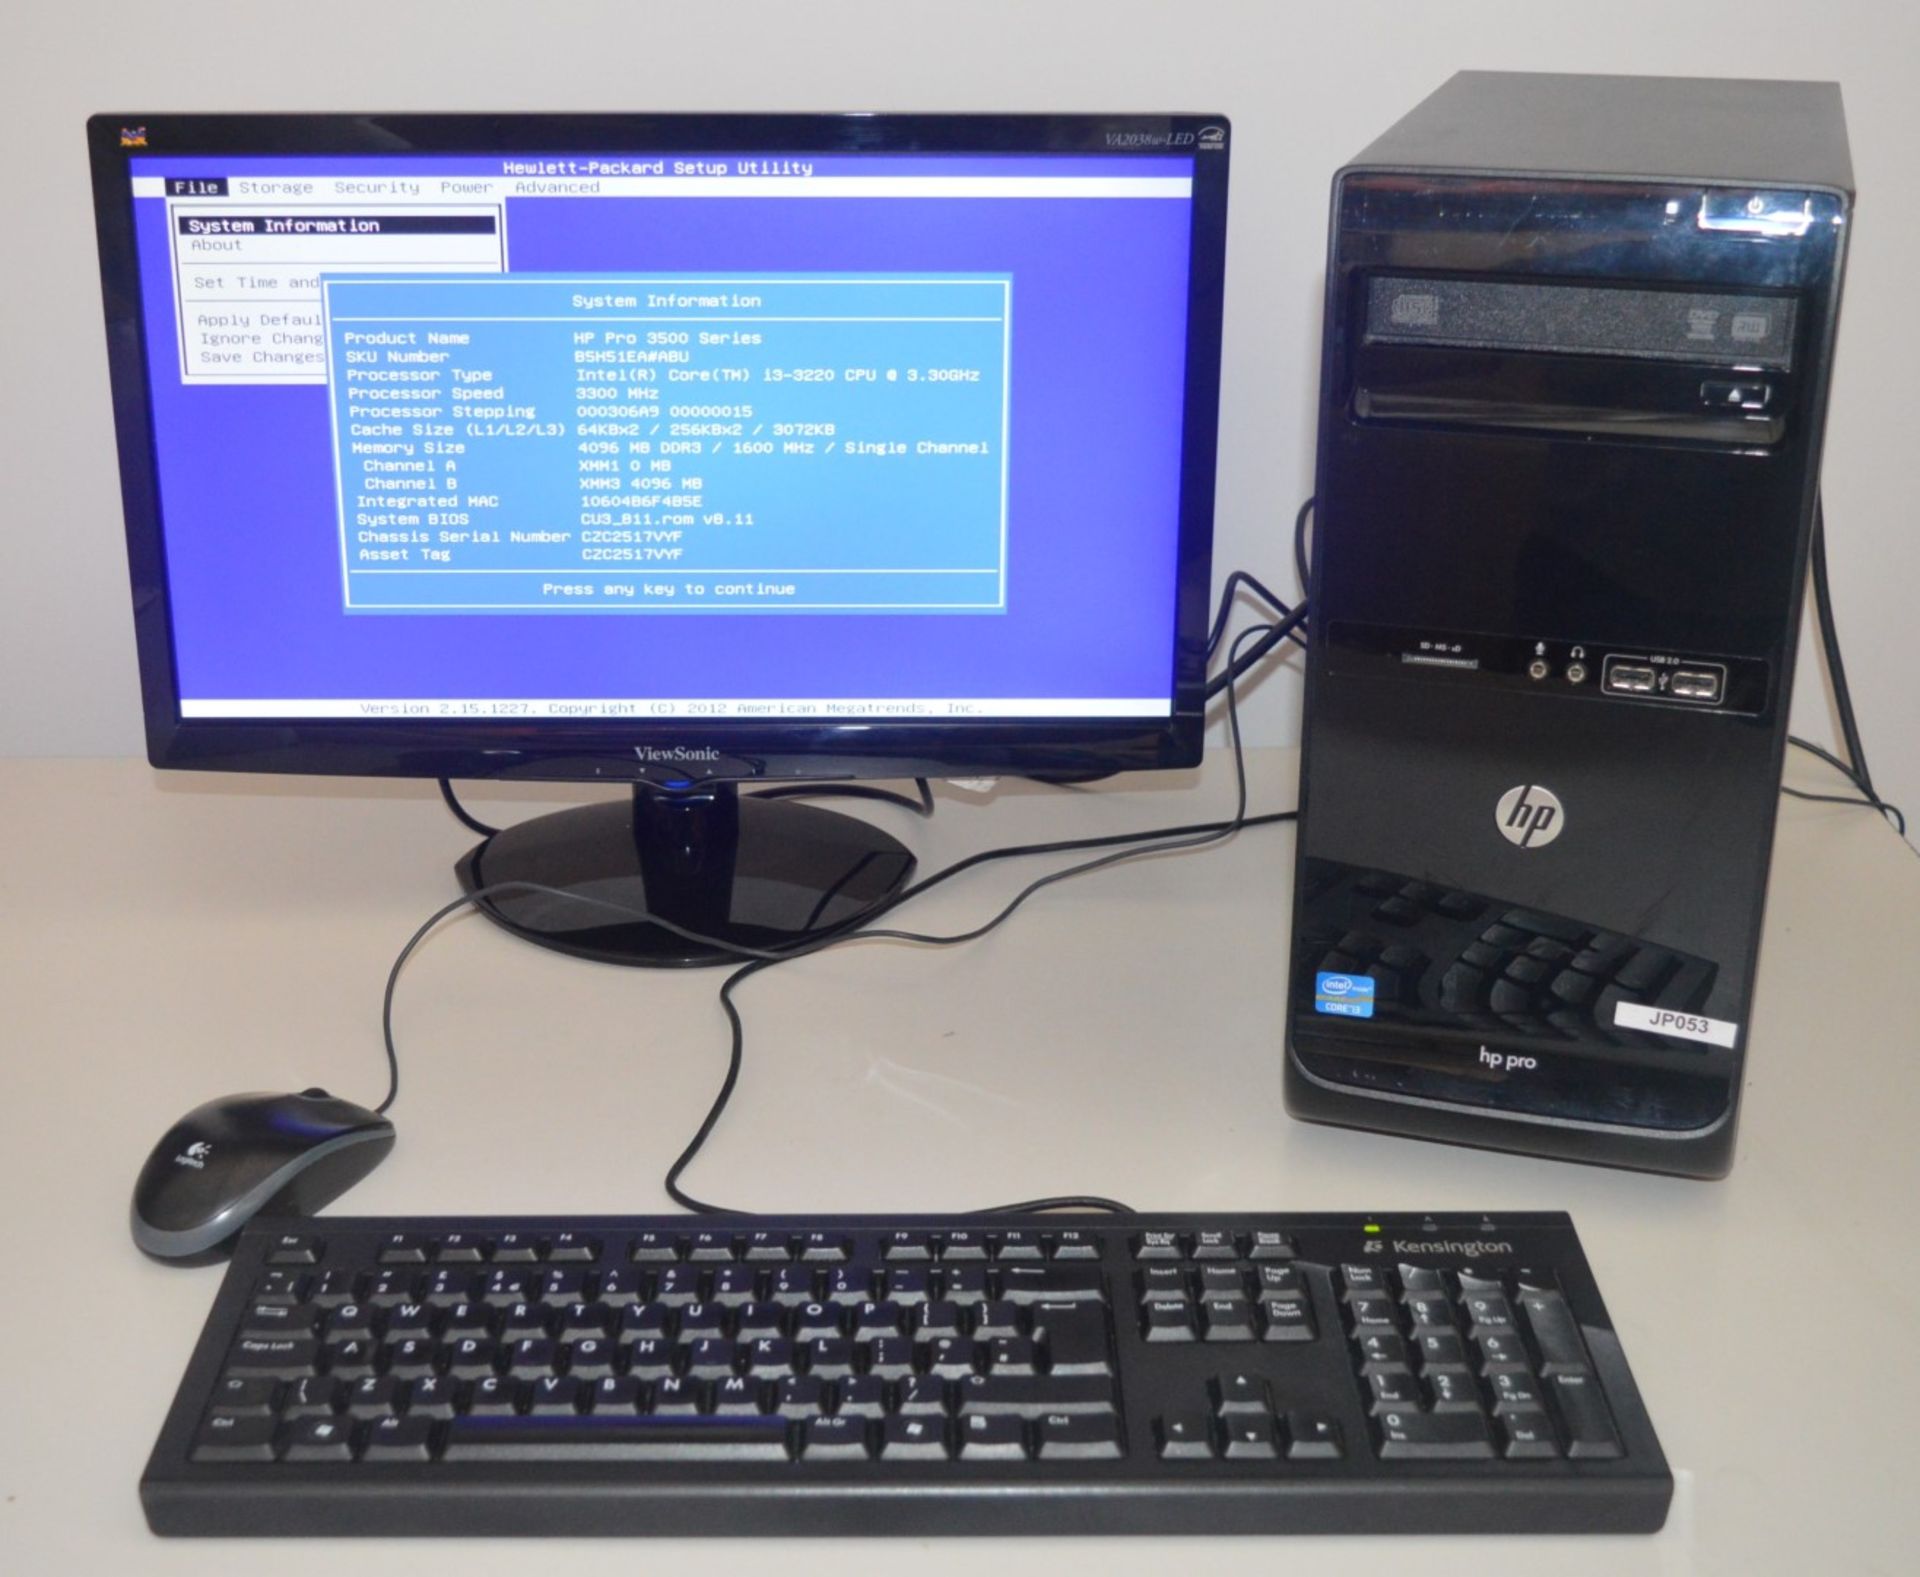 1 x HP Pro 3500 Series Desktop Computer With Viewsonic 20 Inch LED Monitor - Features Intel Core